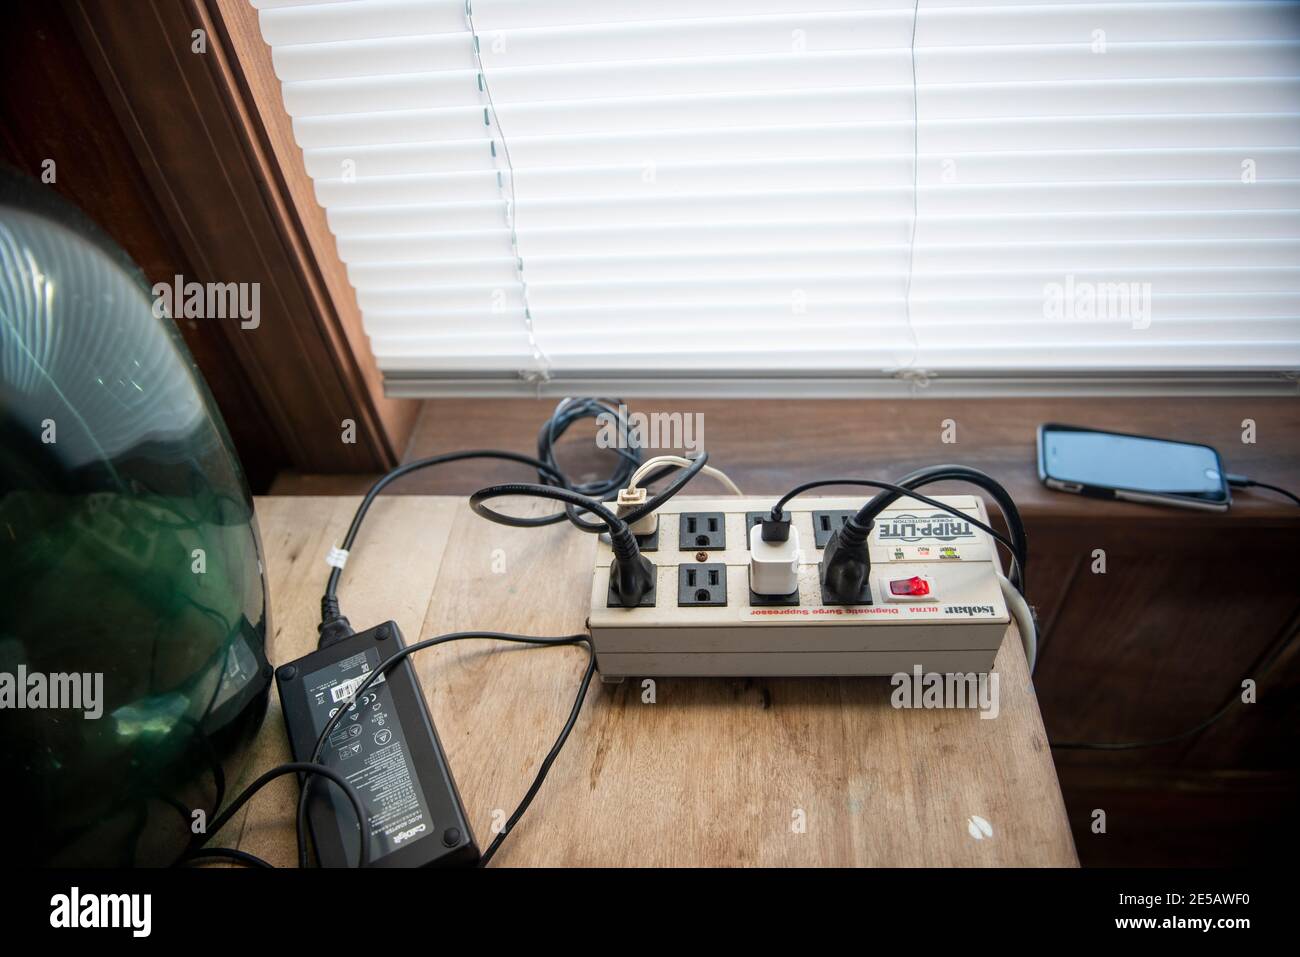 A surge protector with many cords plugged in. Stock Photo